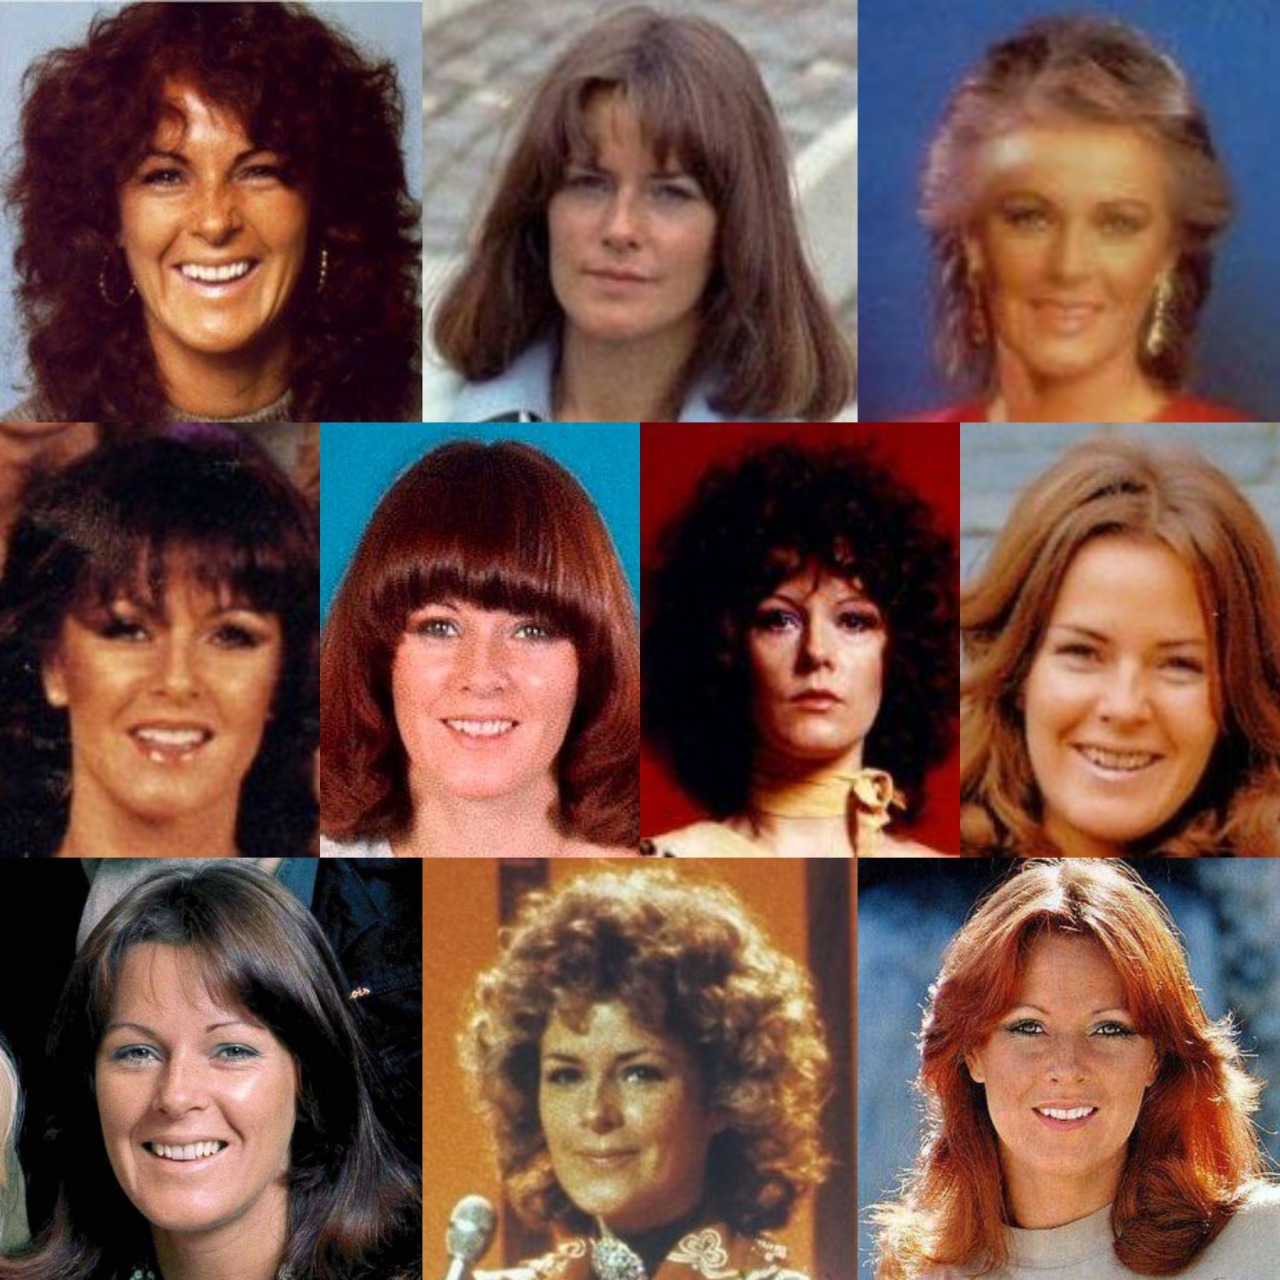 The girl with a thousand hairstyles: ABBA’s Anni-Frid Lyngstad. Which one is your favorite?